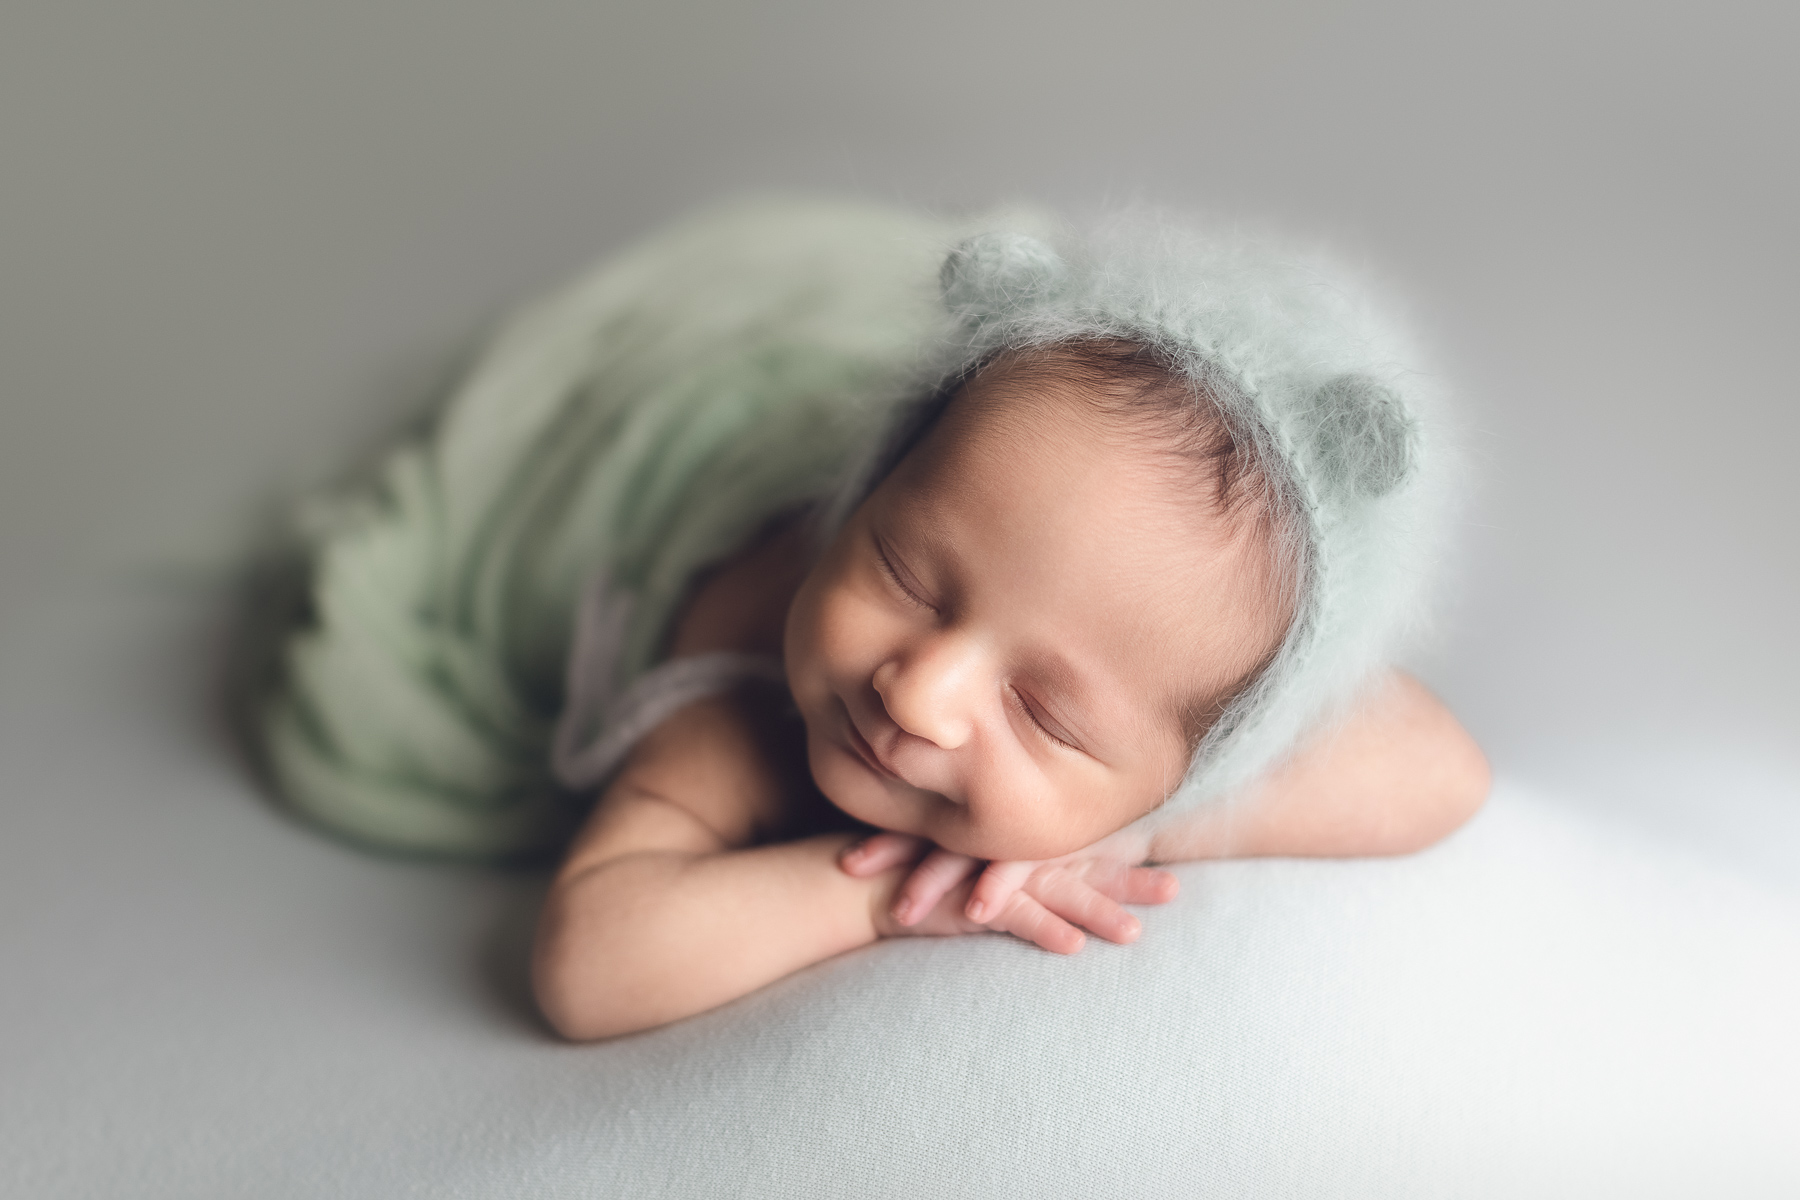 Newborn baby only photography package on sale - baby boy smiling on a green background and bear hat